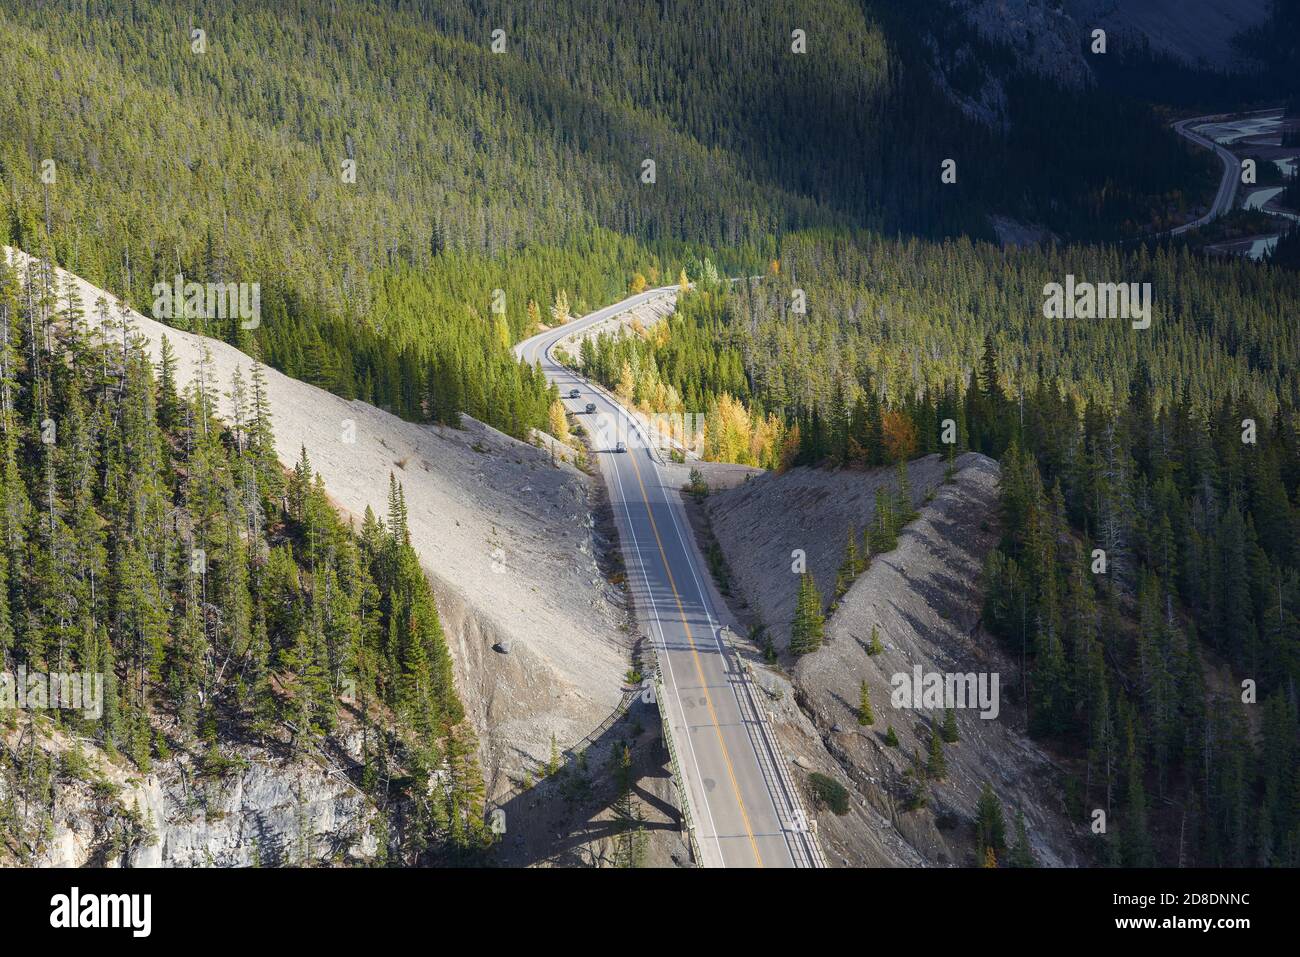 CANADA, ALBERTA, JASPER, 2014-09-26:View down onto Icefield Parkway in Jasper National Park. The 240 km long road was built 1940 and is one of the mos Stock Photo